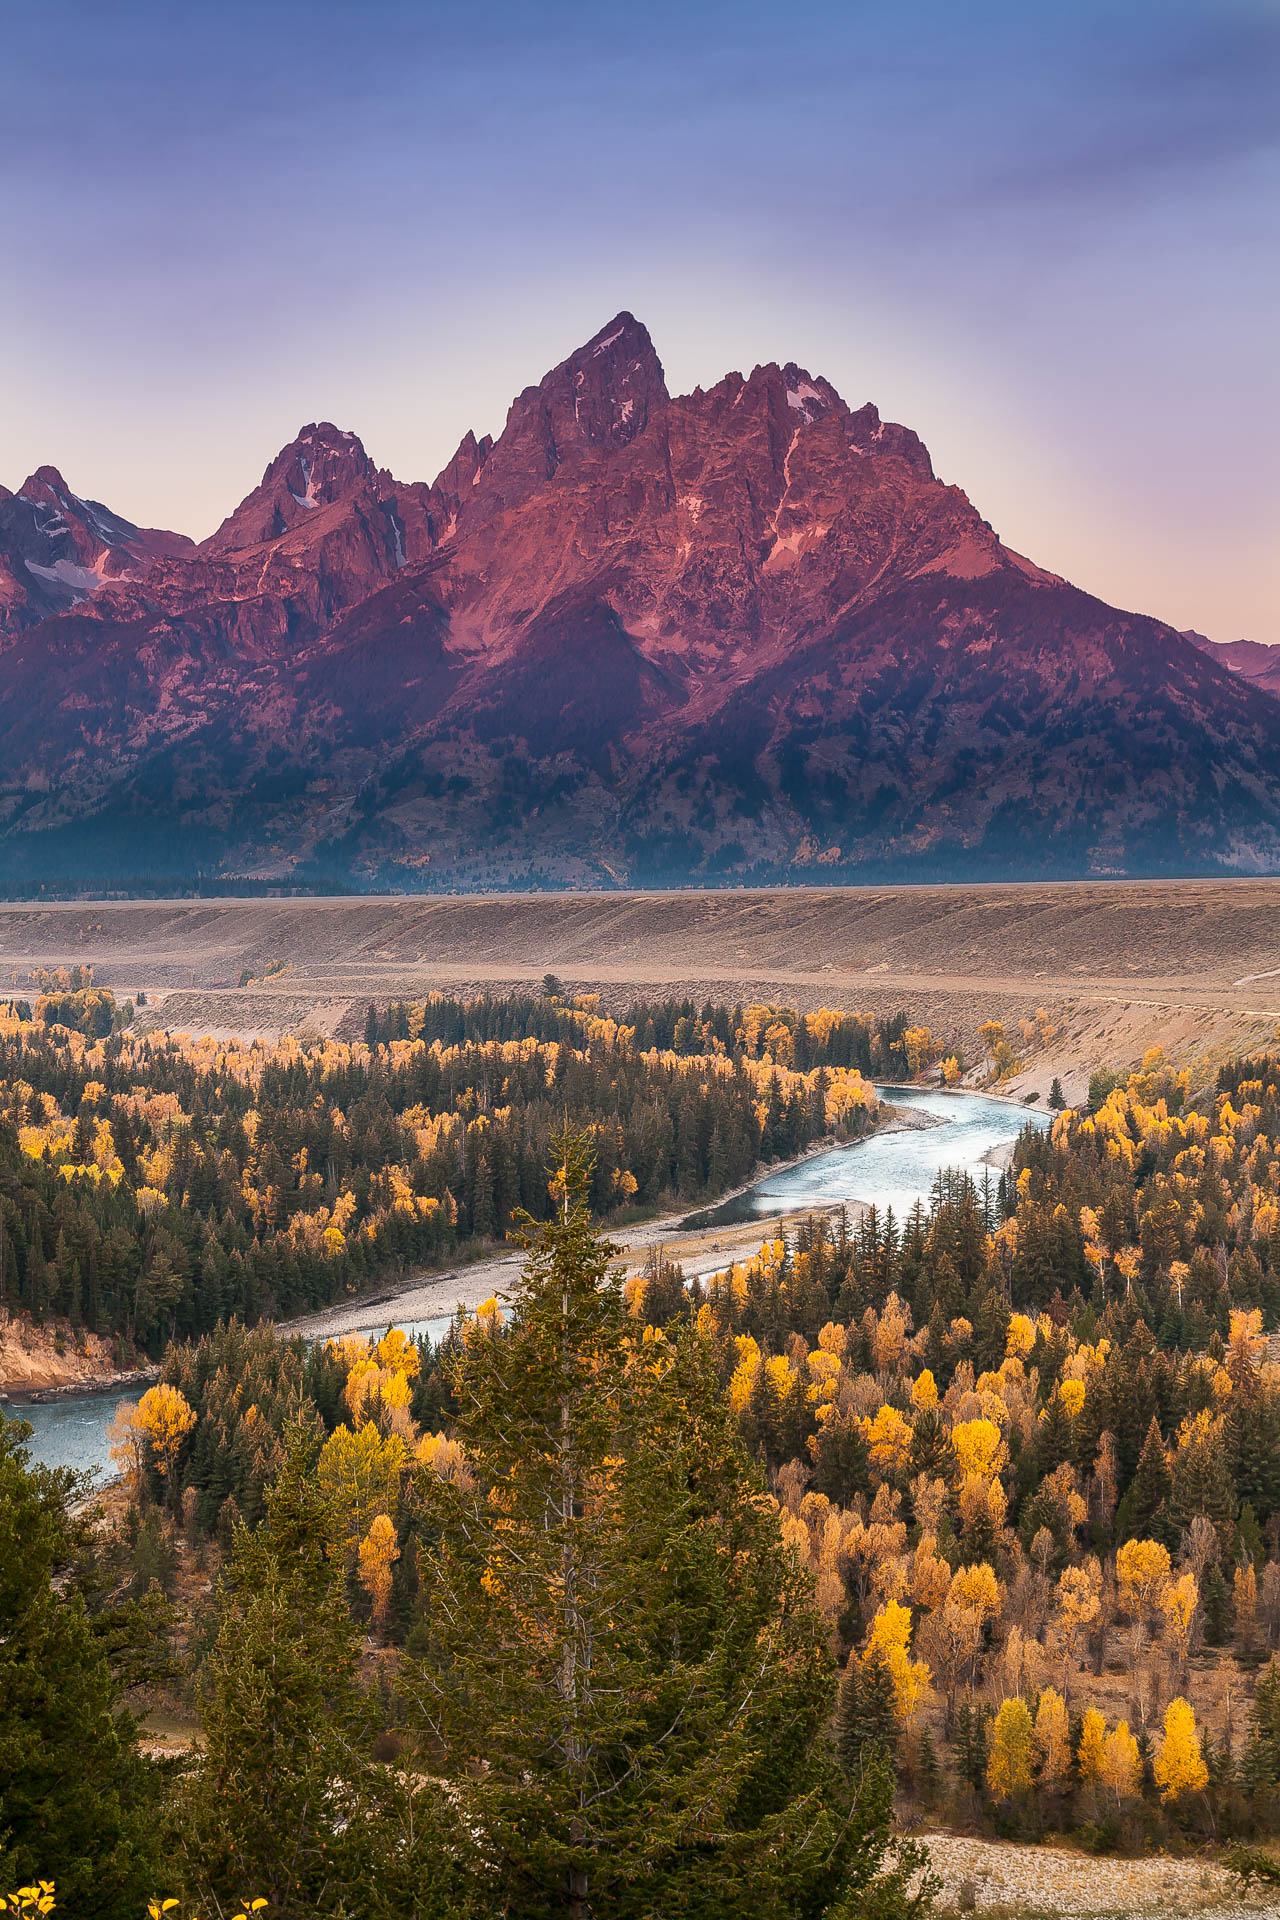 Sunrise on the Grands Tetons and the Snake River